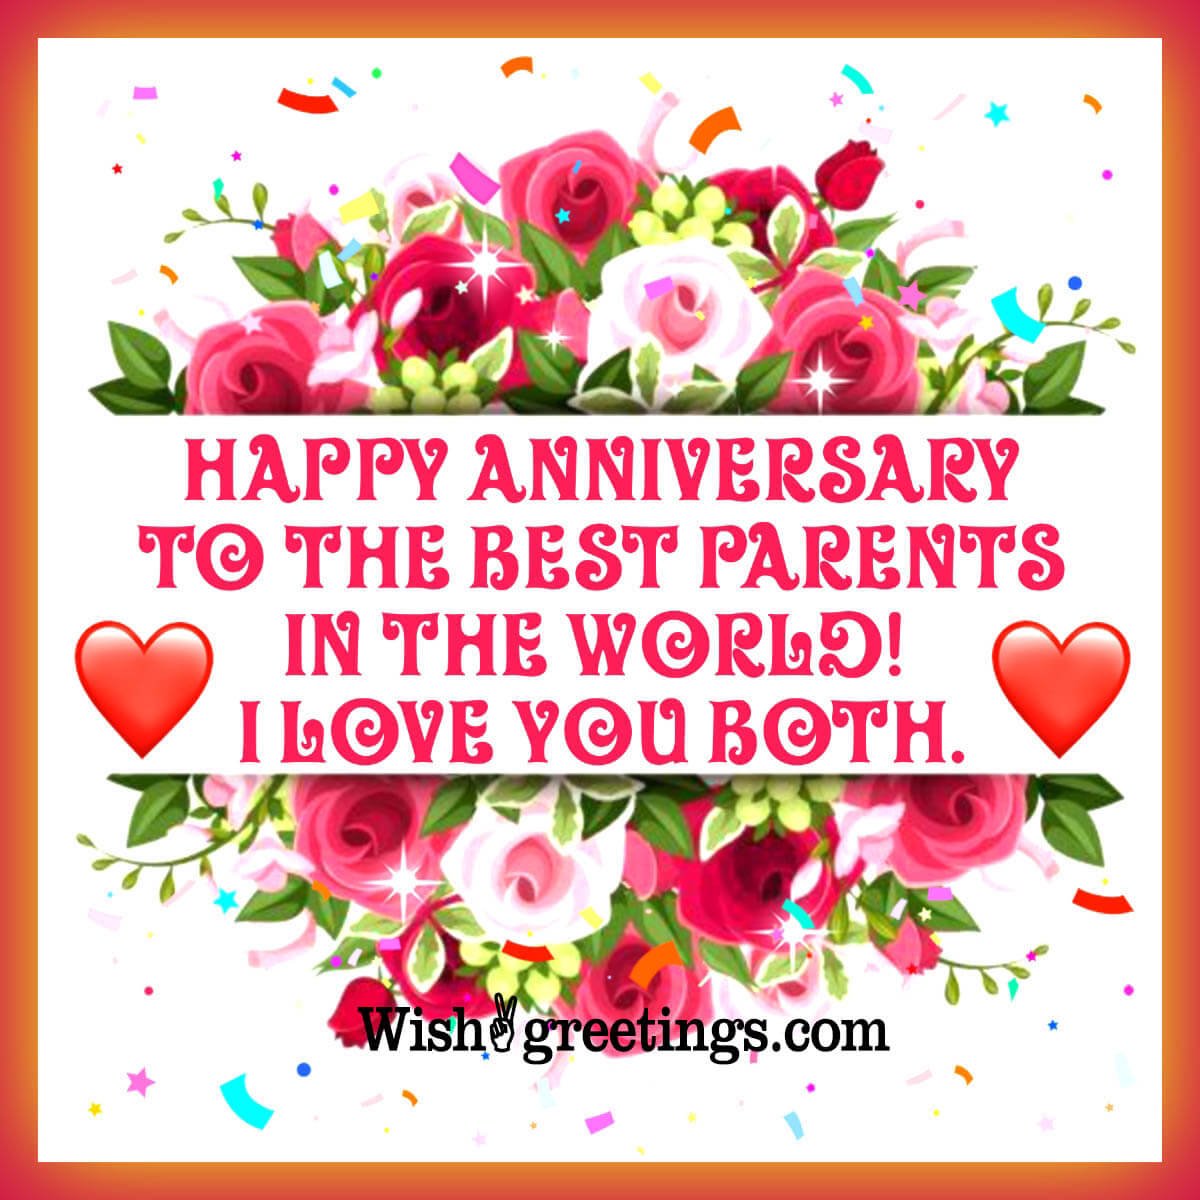 Happy Anniversary Wishes Images For Parents